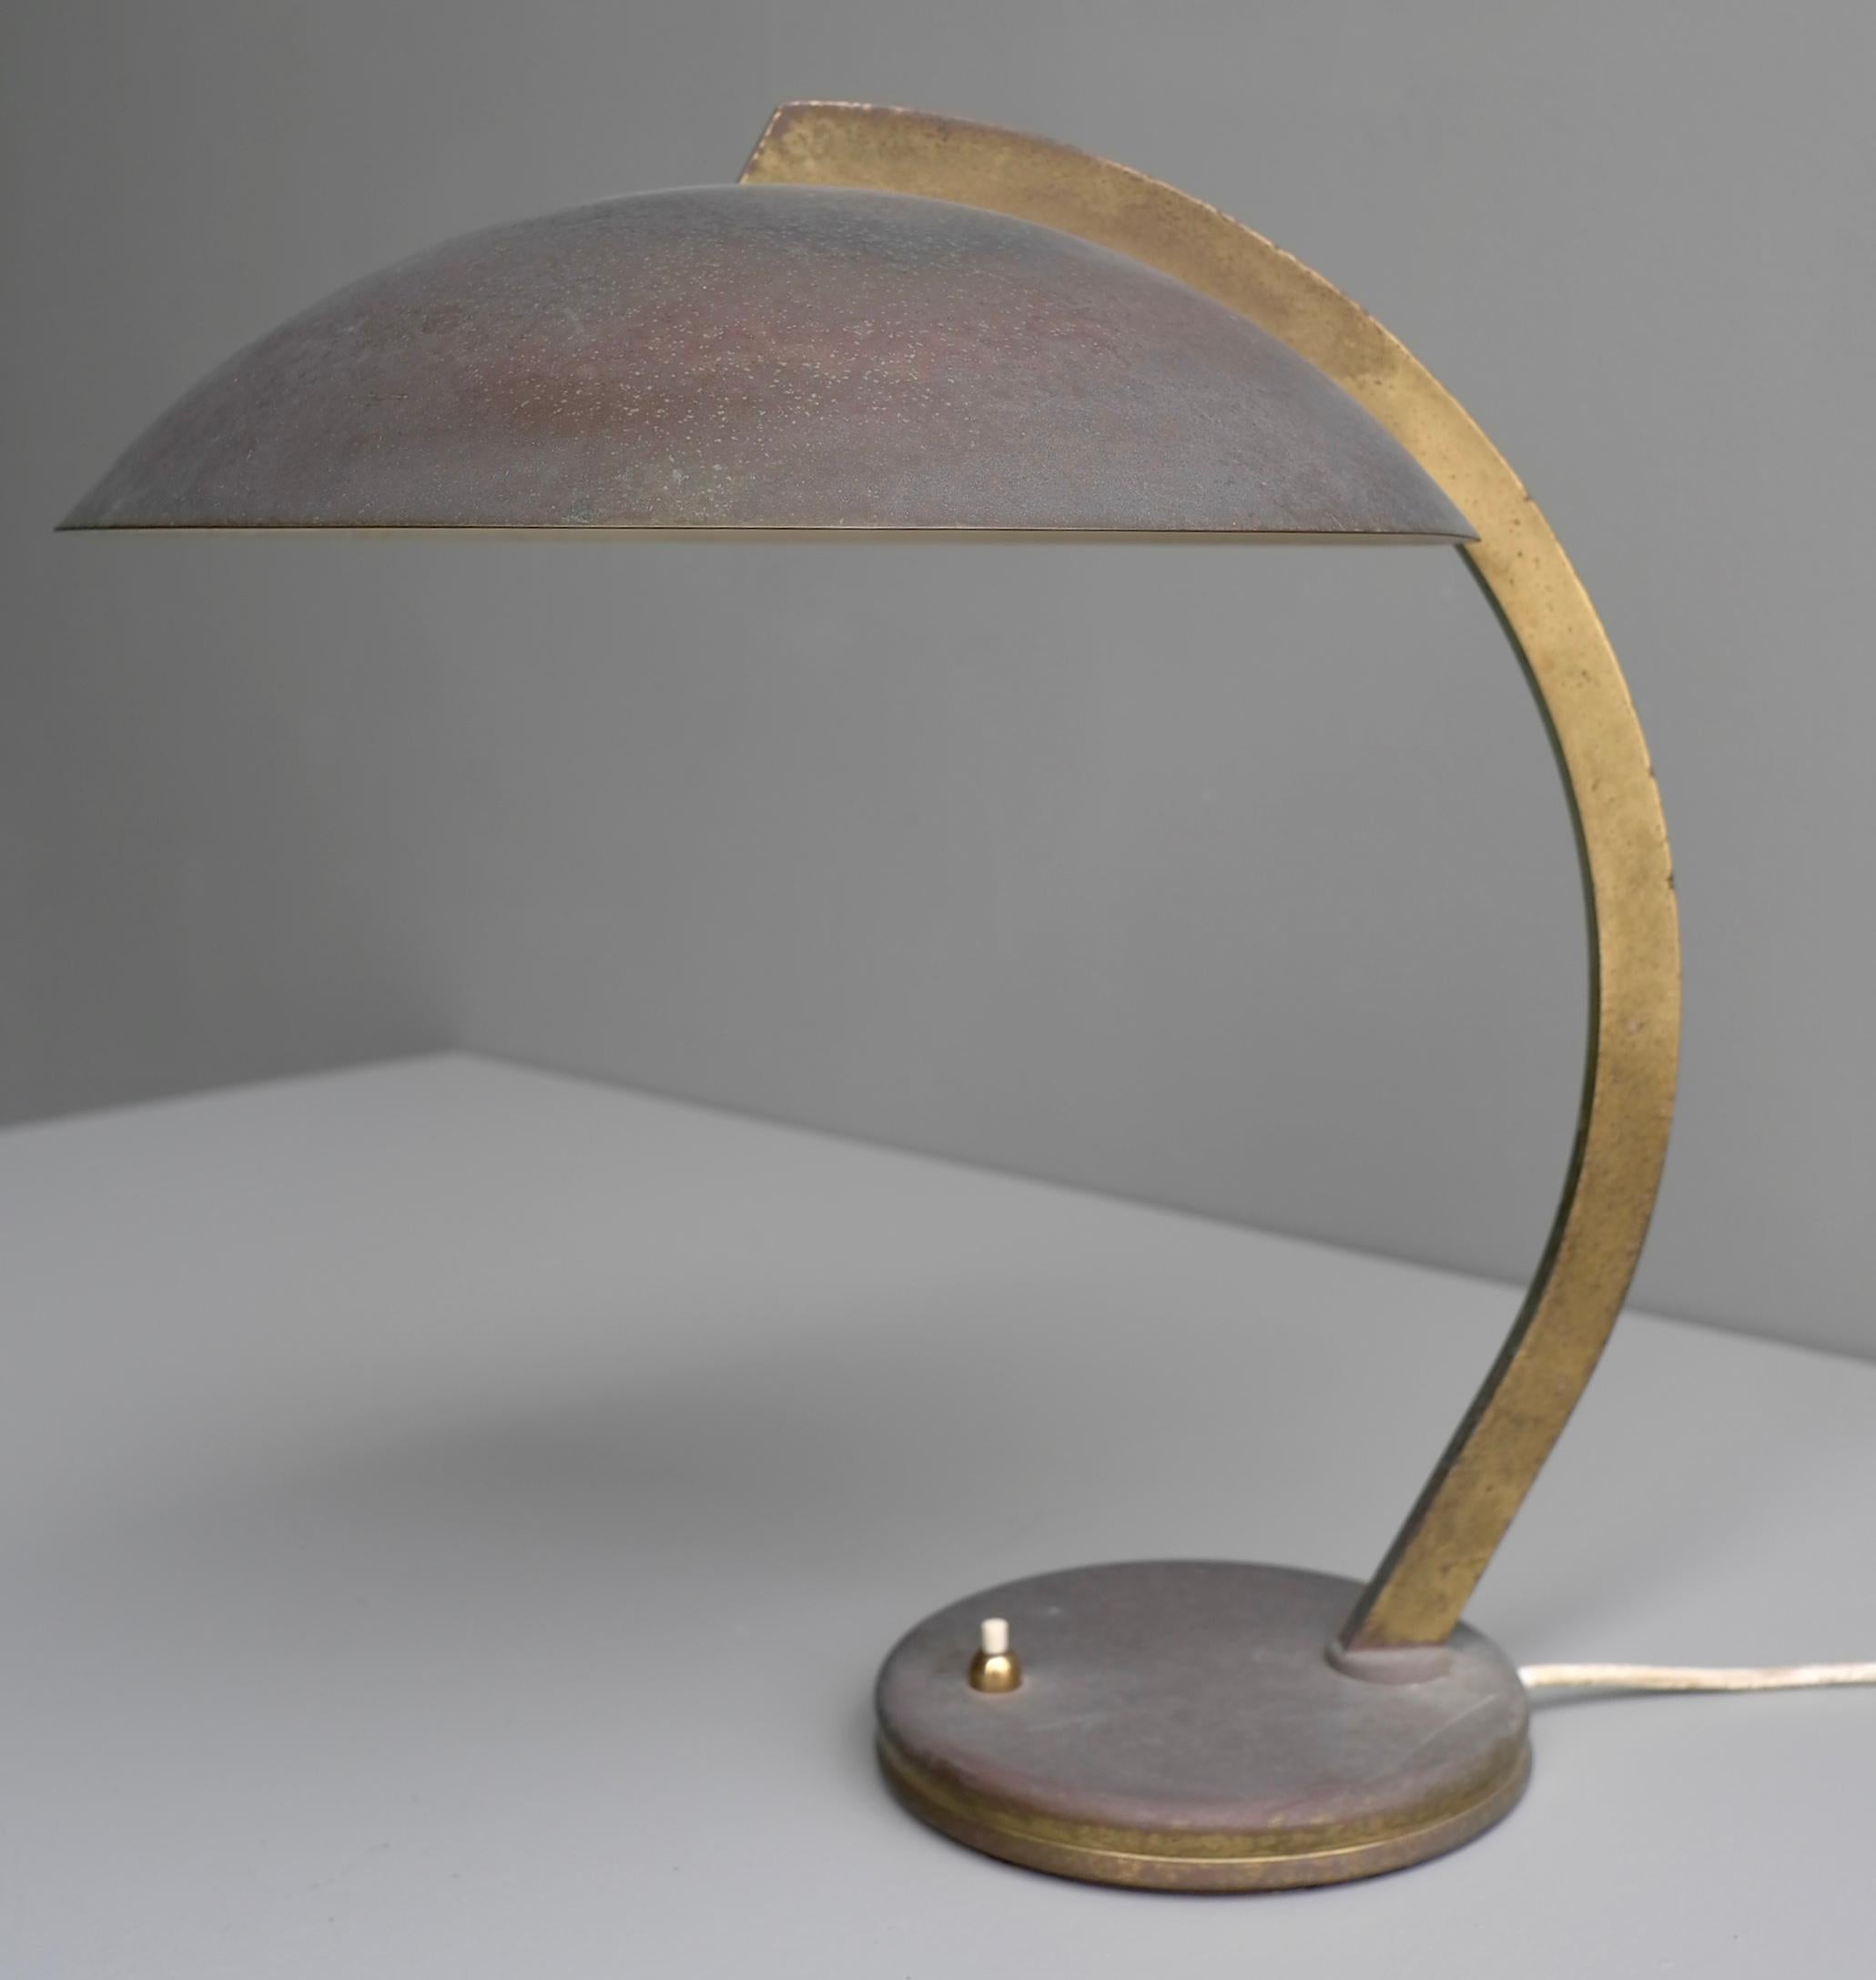 Curved Art Deco brass and copper desk lamp, midcentury, France.